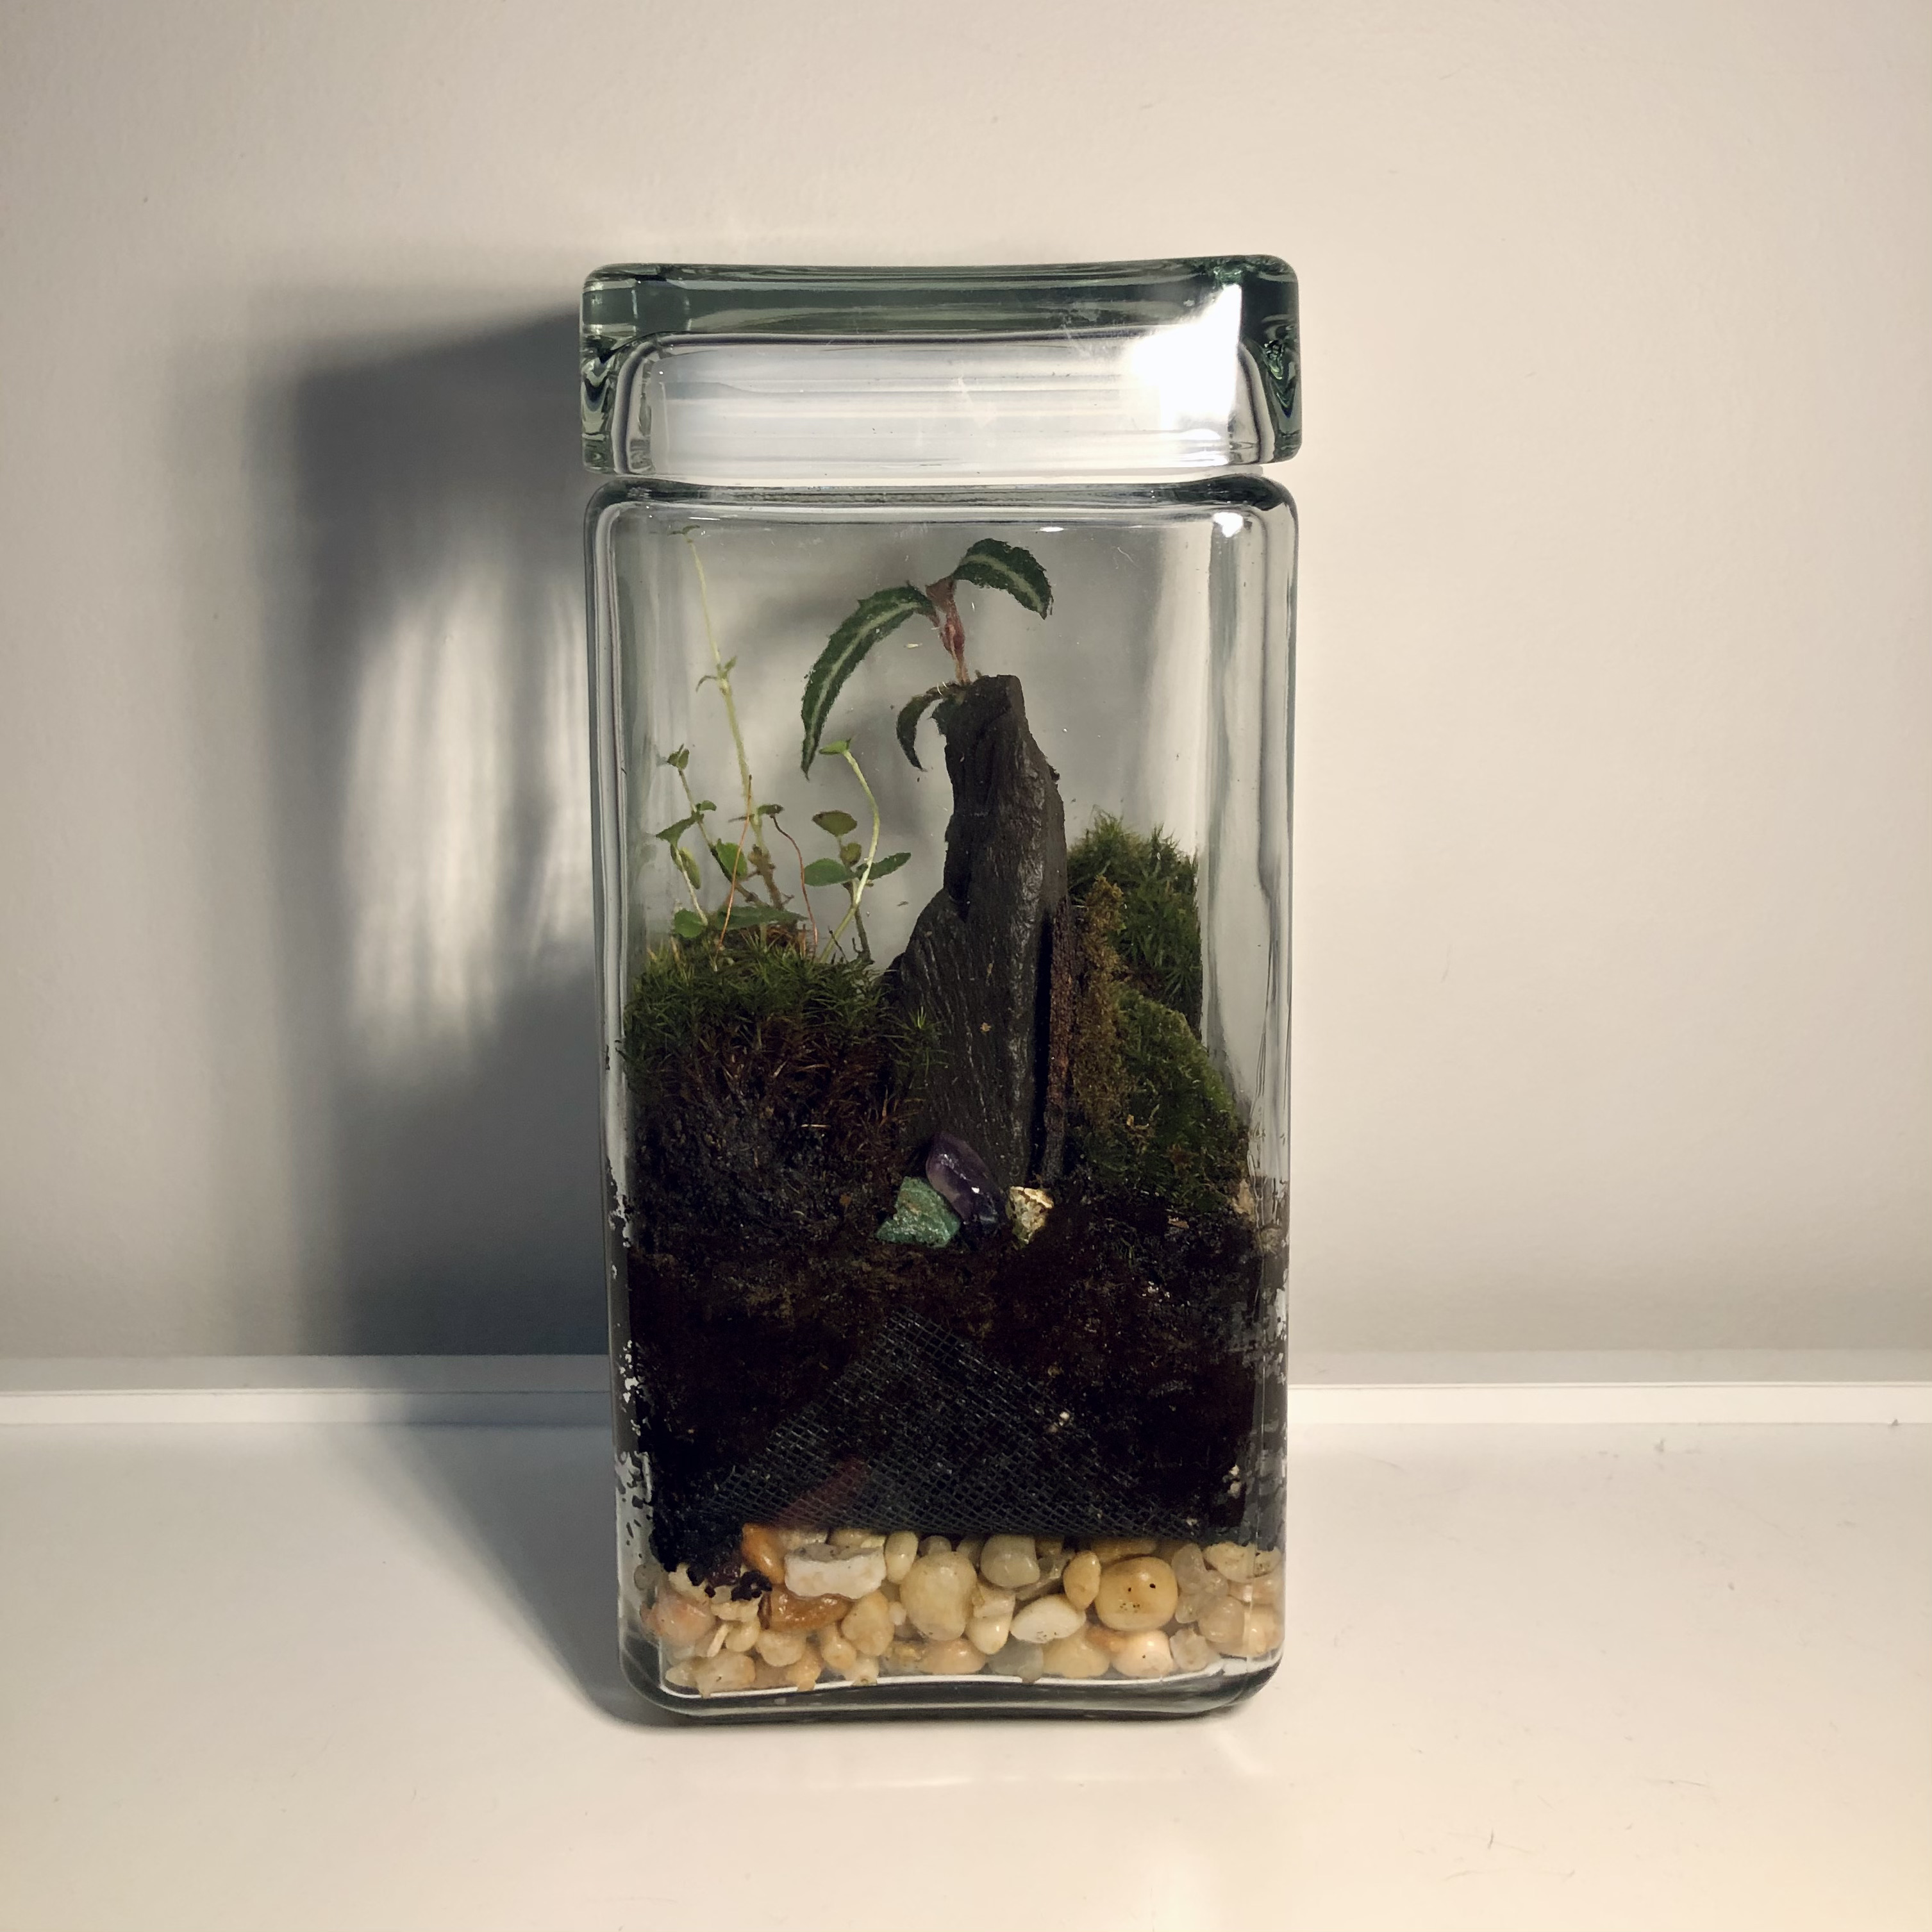 viewing the rectangular terrarium from the right side, through the glass there's layers of gravel and soil, then on top there's moss, small plants and a small pointy rock positioned near the center.